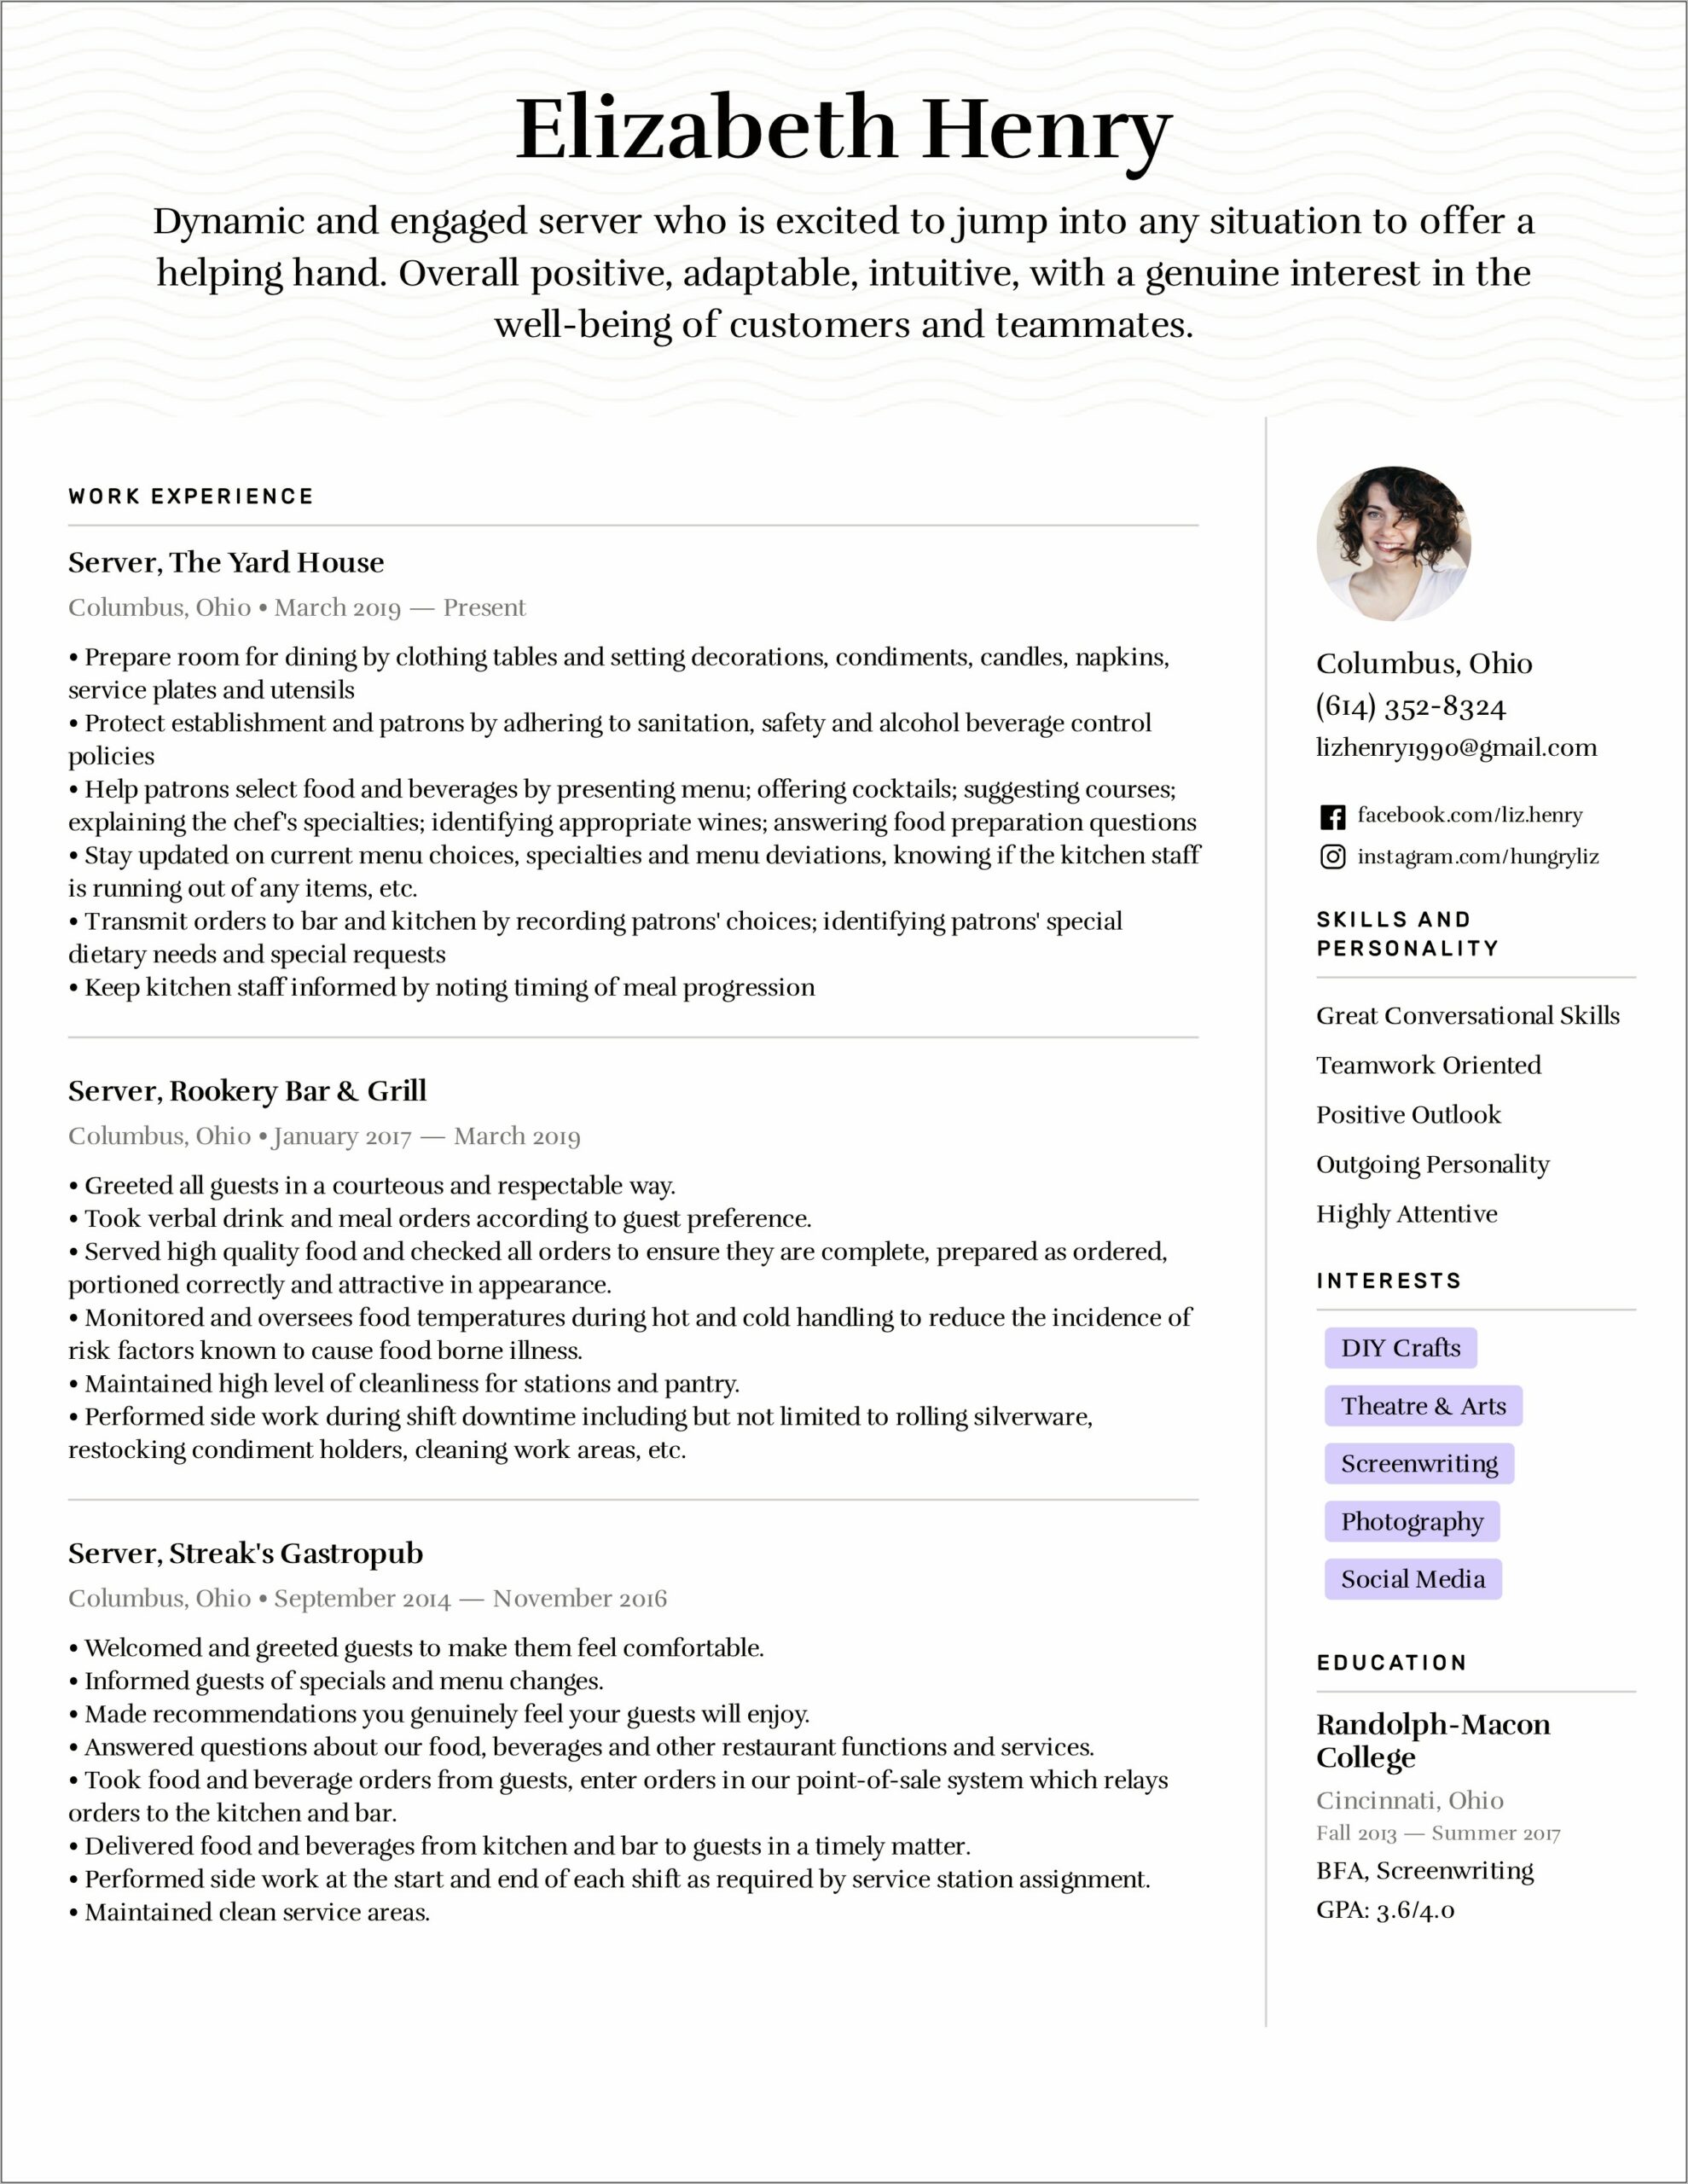 Resume Templates With Contact Information On The Side